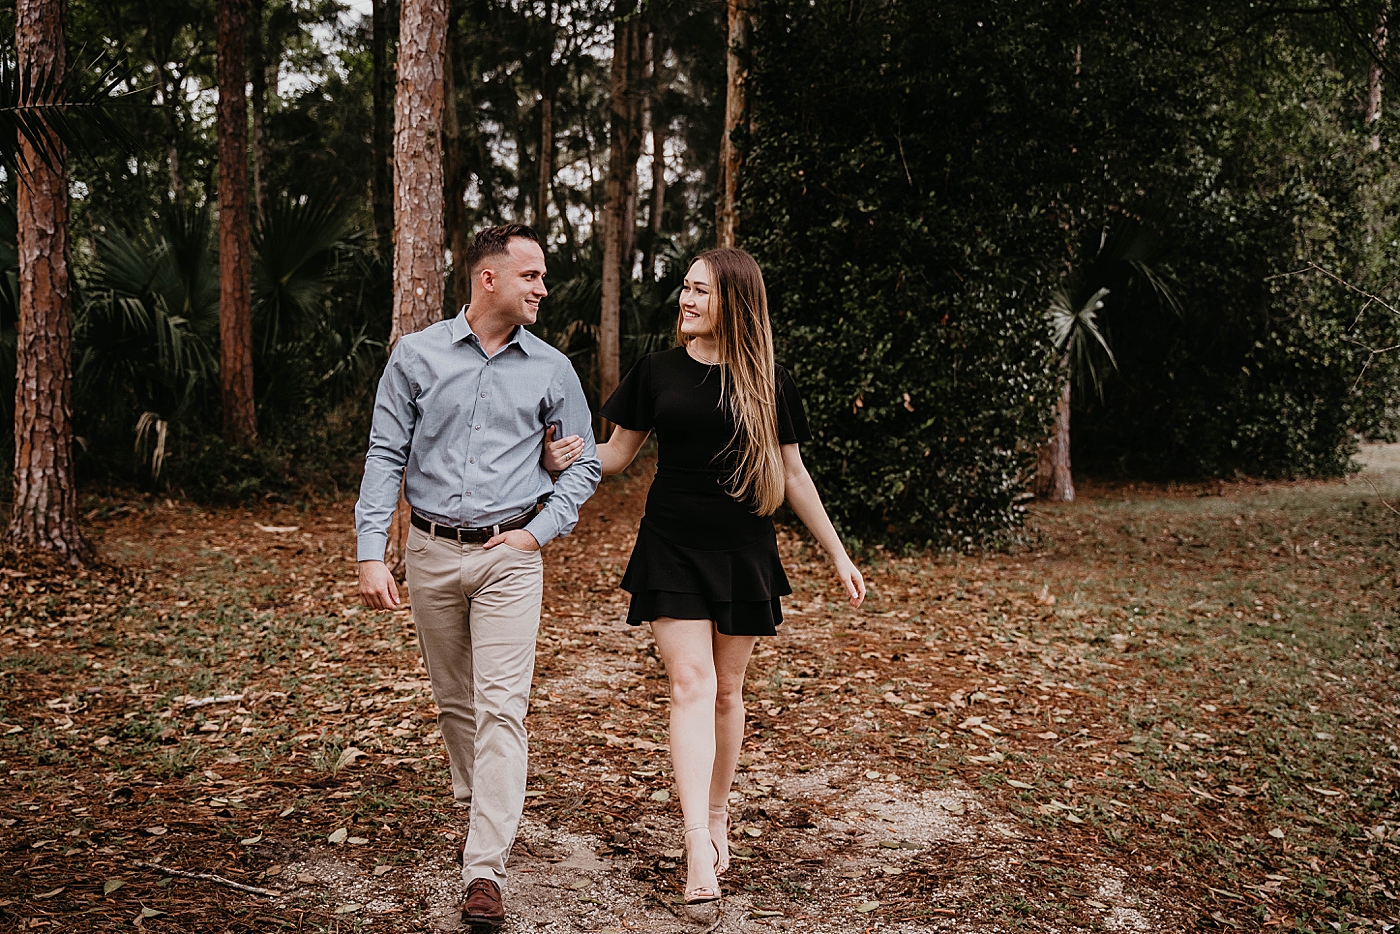 Couple arm in arm walking together in the forest Rustic South Florida Engagement Photography captured by South Florida Engagement Photographer Krystal Capone Photography 